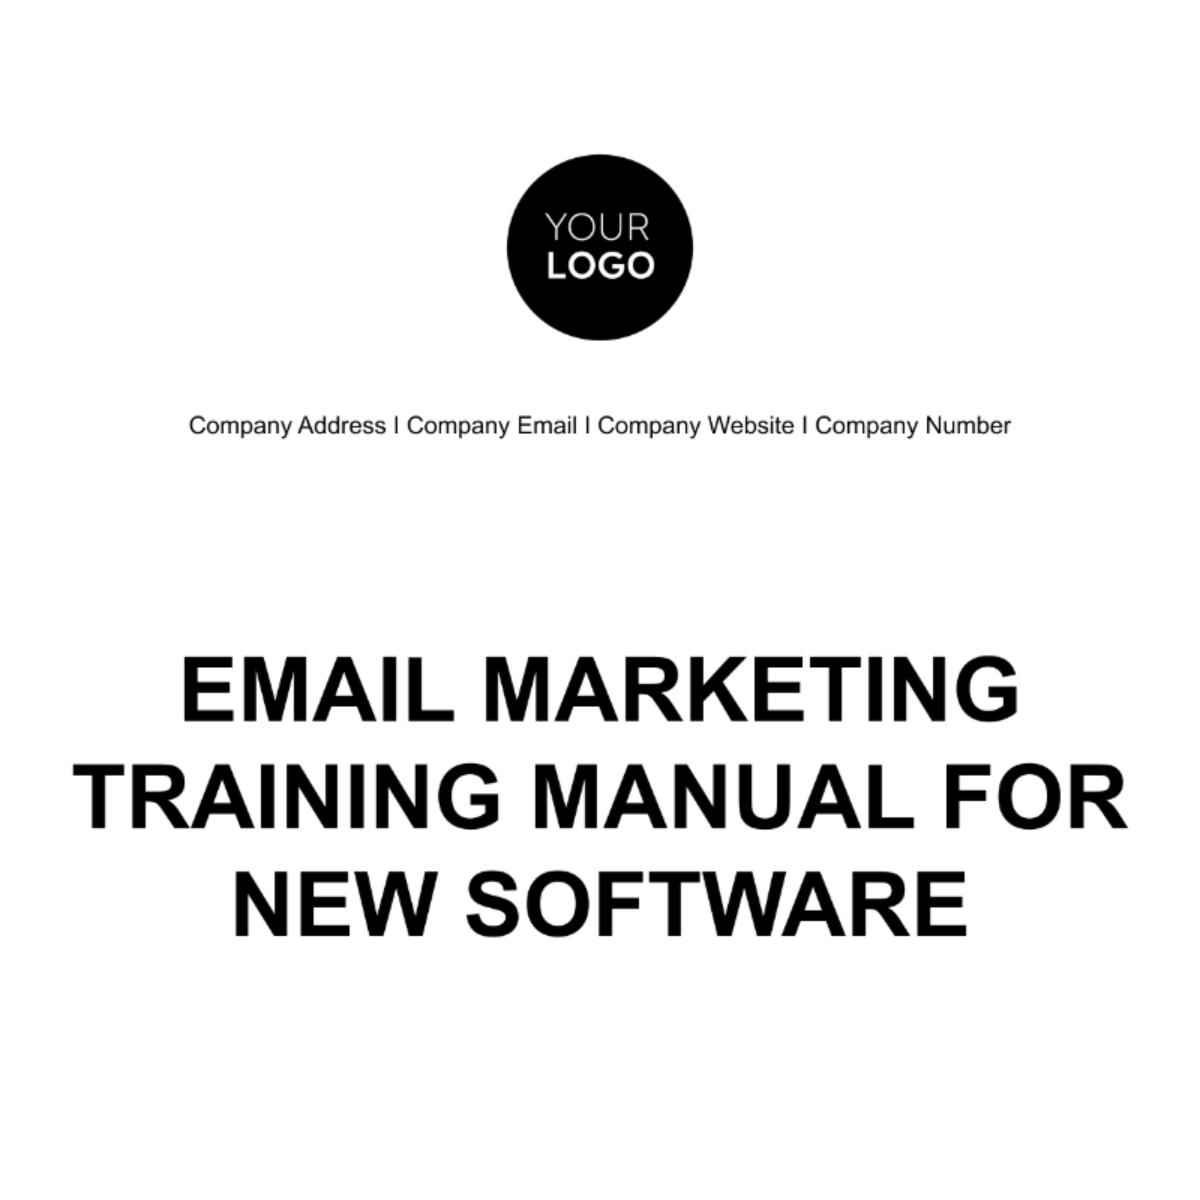 Email Marketing Training Manual for New Software Template